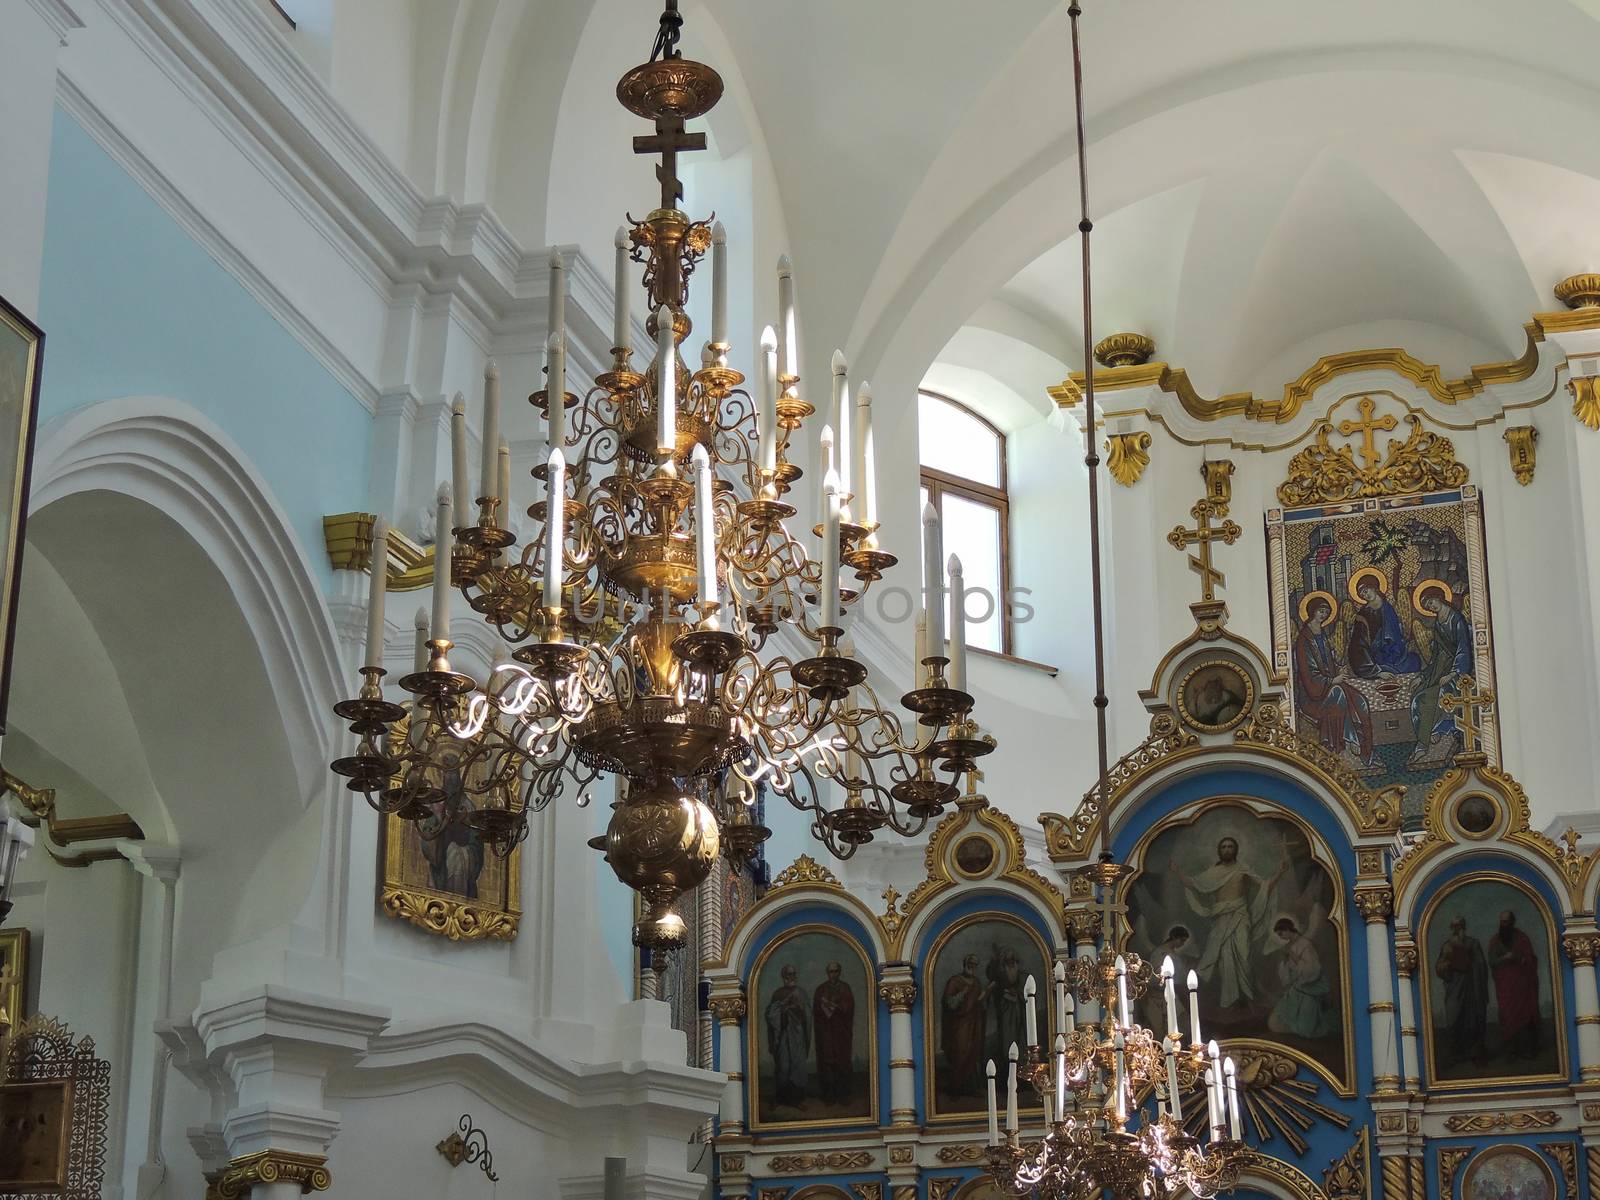 Orthodox Minsk Holy spirit Cathedral in Belarus indoors. Interior design of Church facilities.